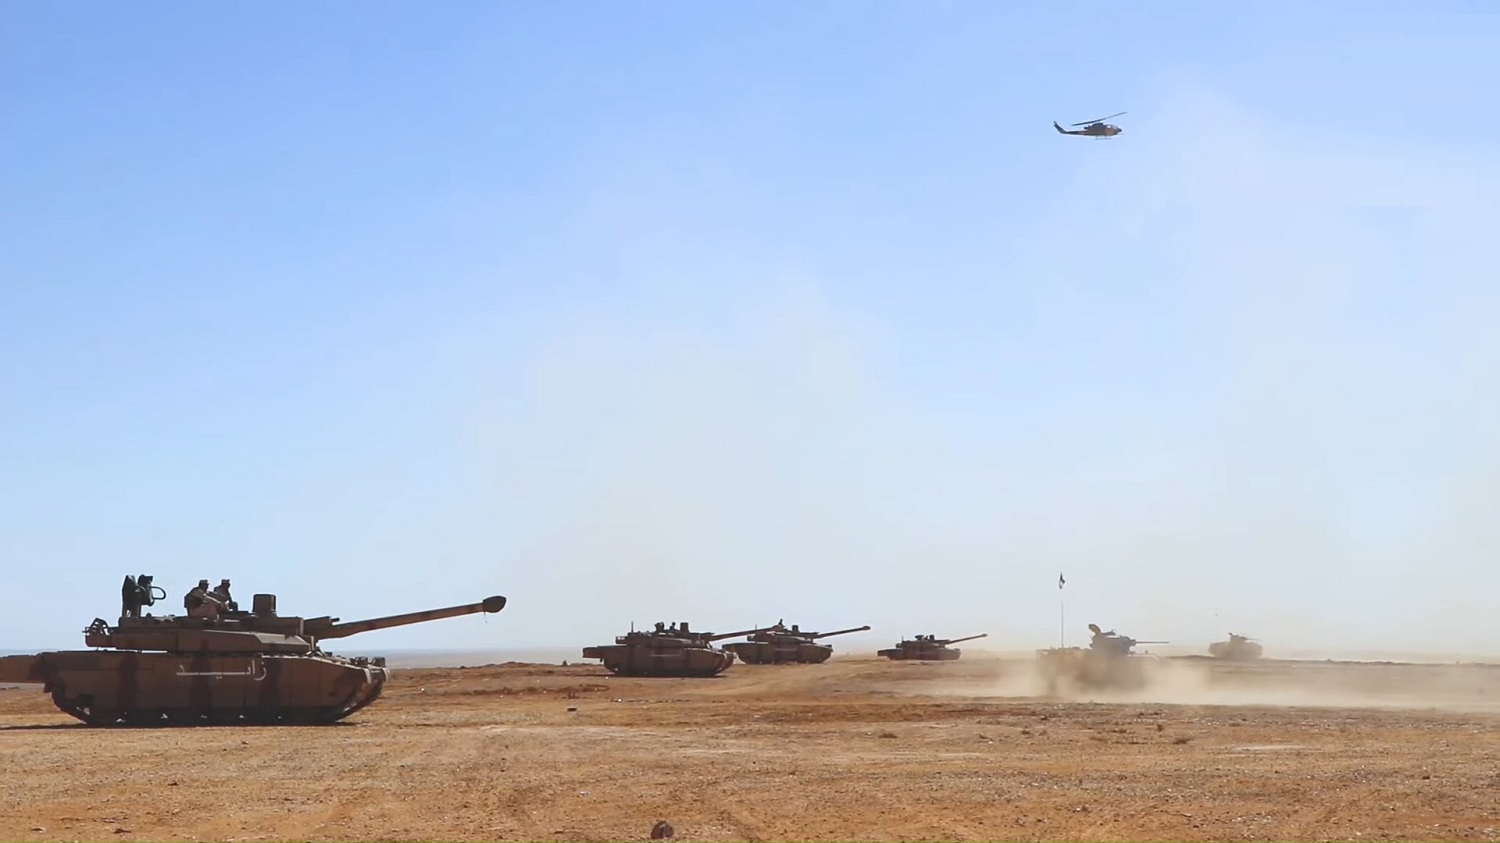 jordan-army-deploys-for-the-first-time-leclerc-tanks-during-military-exercise-1.jpg